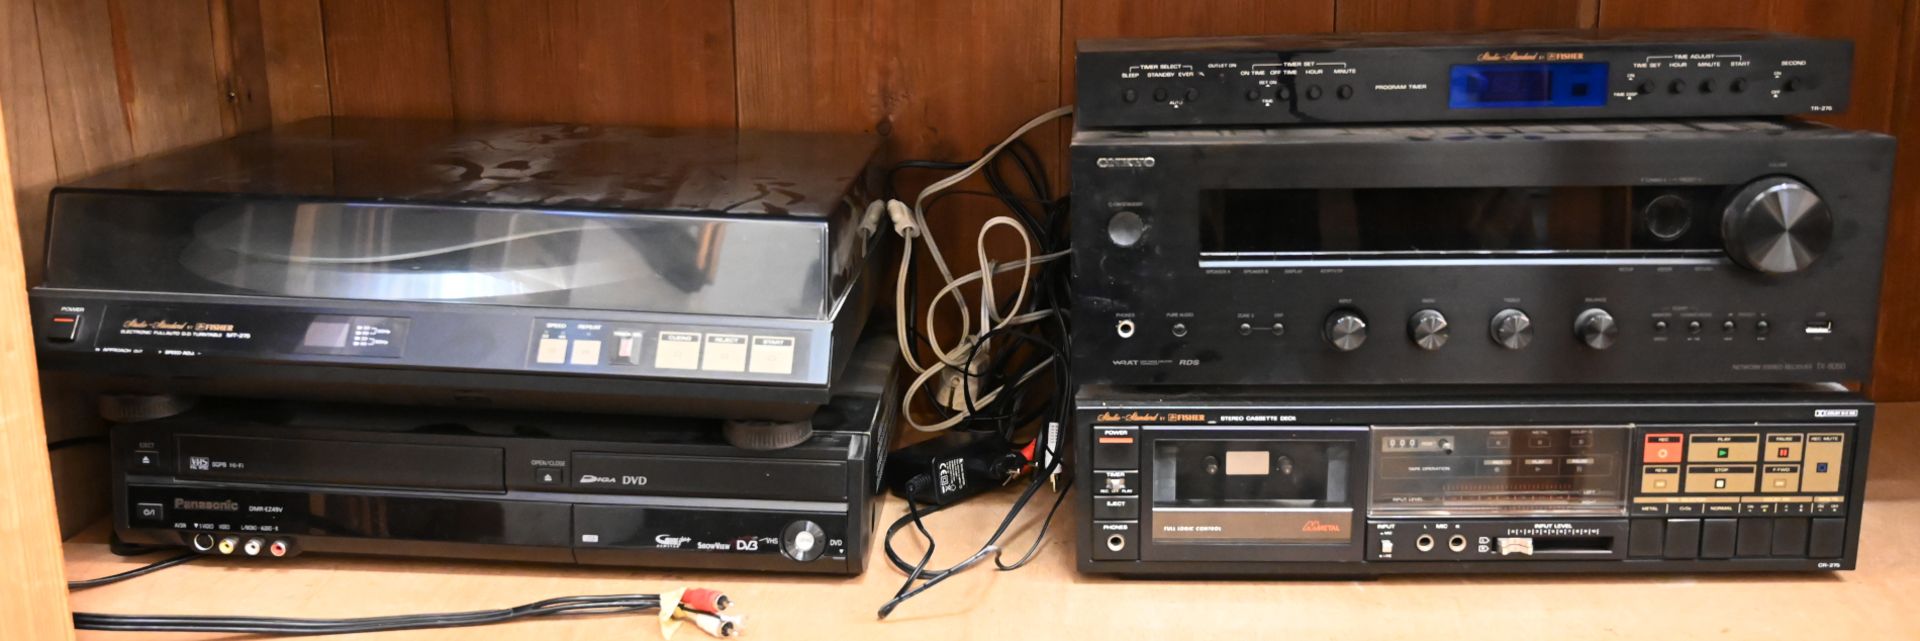 1 Stereoanlage FISHER "Studio-Standard" wohl um 1980 mit Compact Disc Player, Graphic Equalizer, Pla - Image 2 of 3